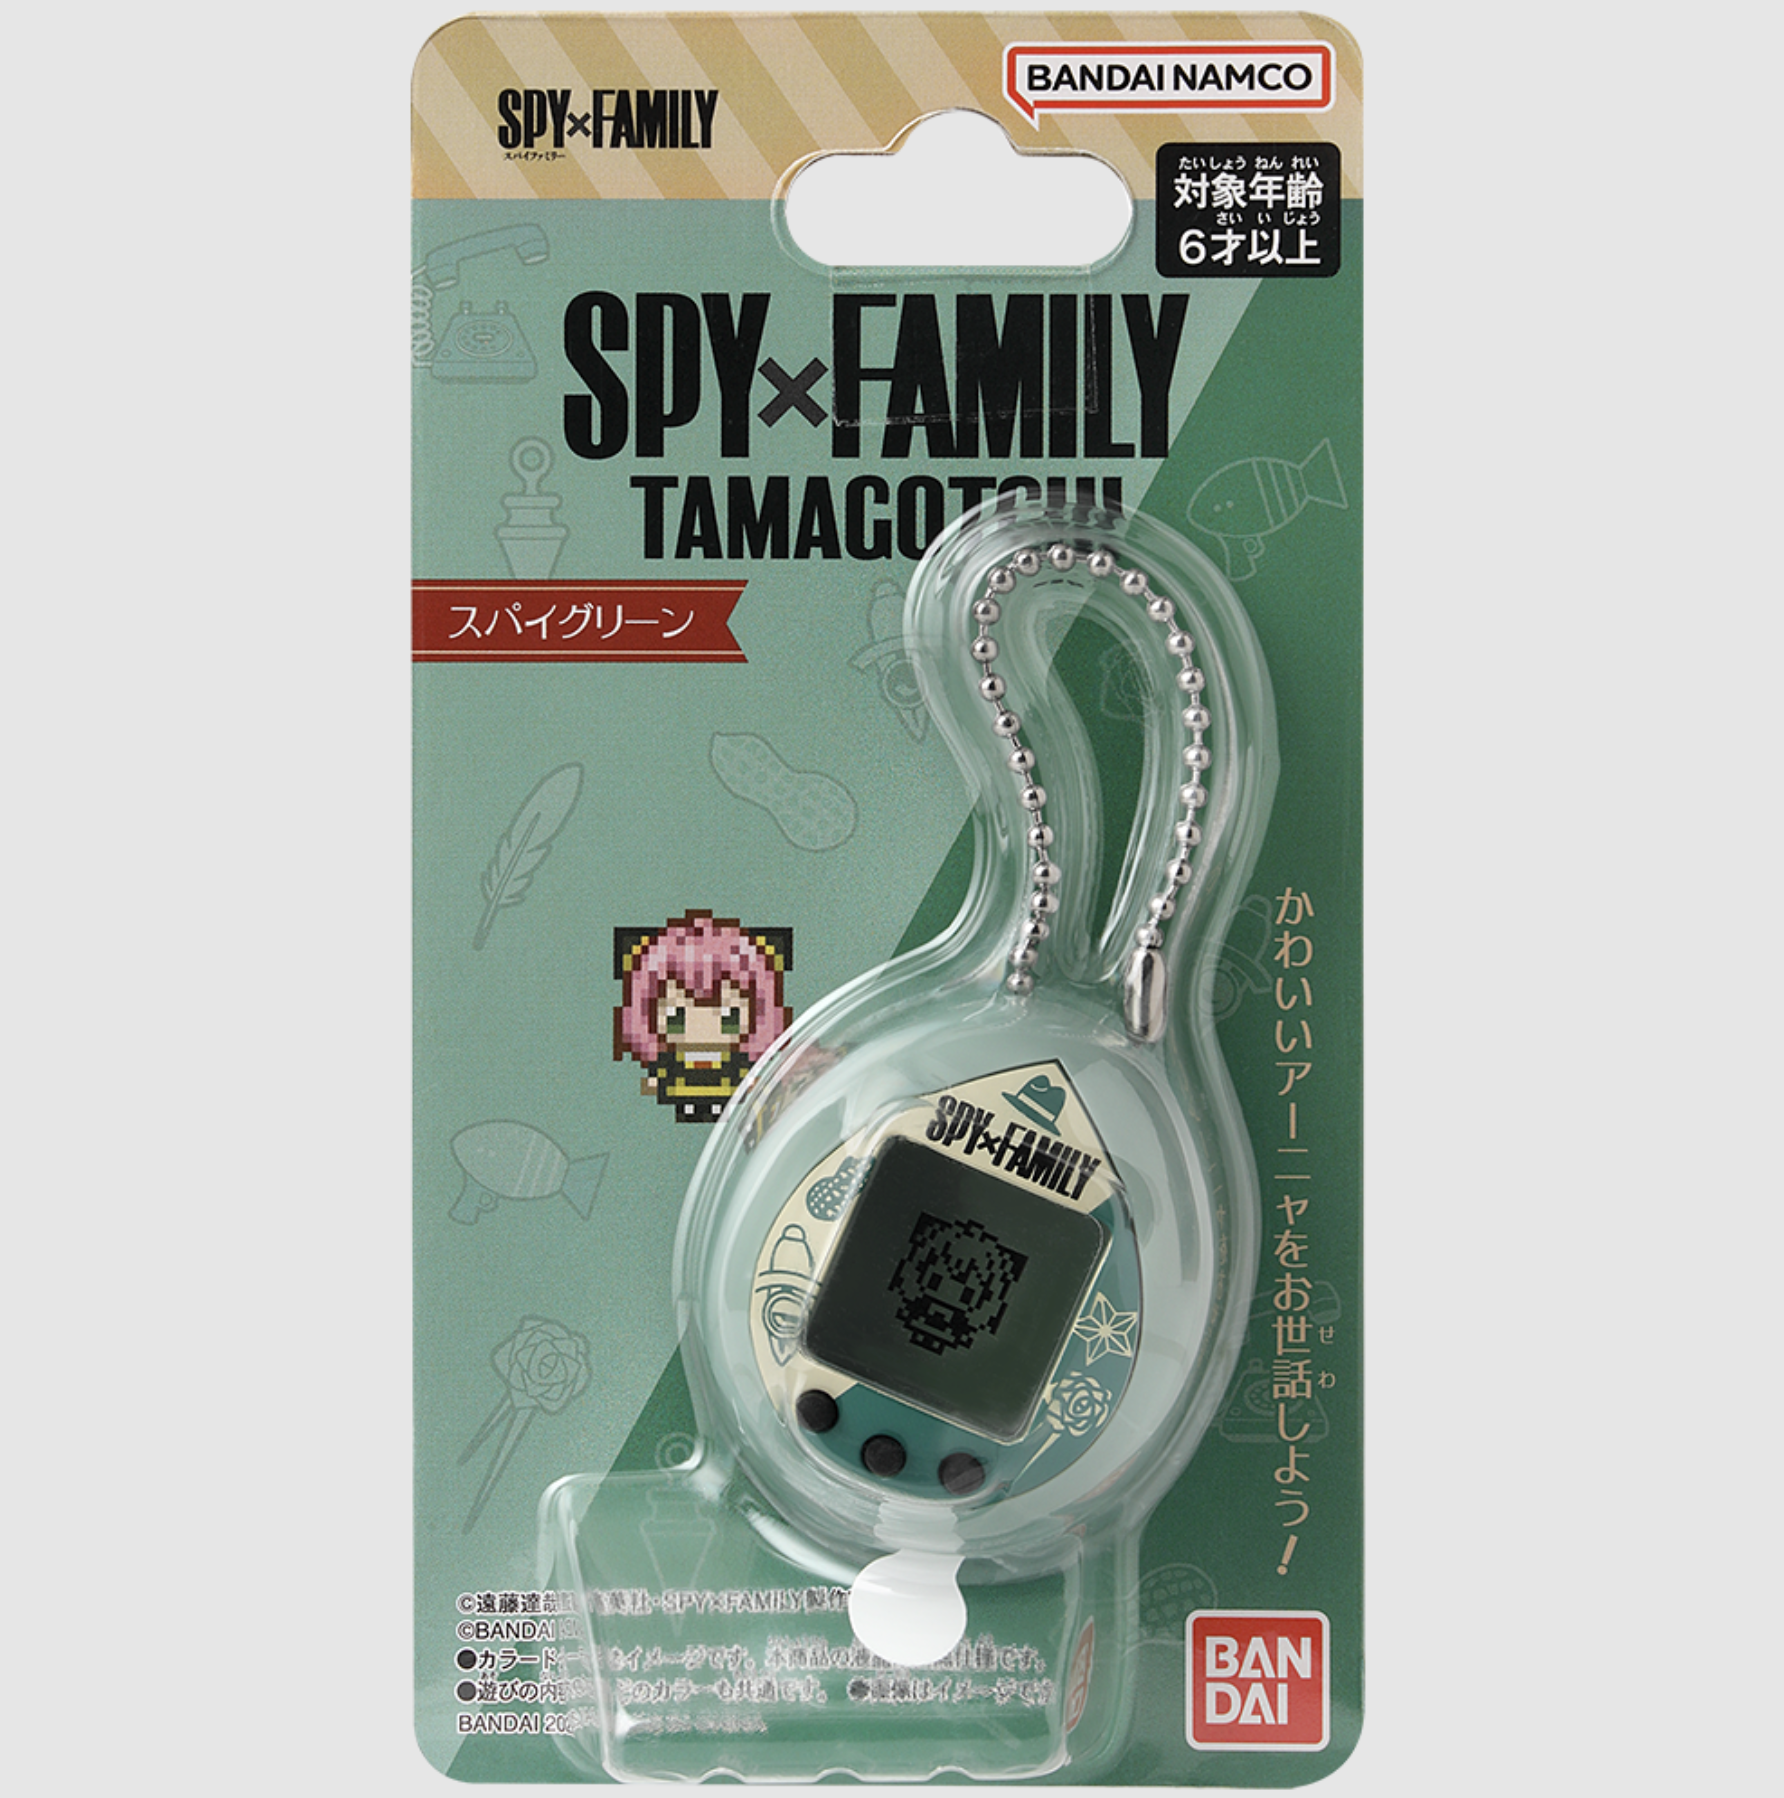 SPY×FAMILY Tamagotchi on retail packaging with keychain accessory